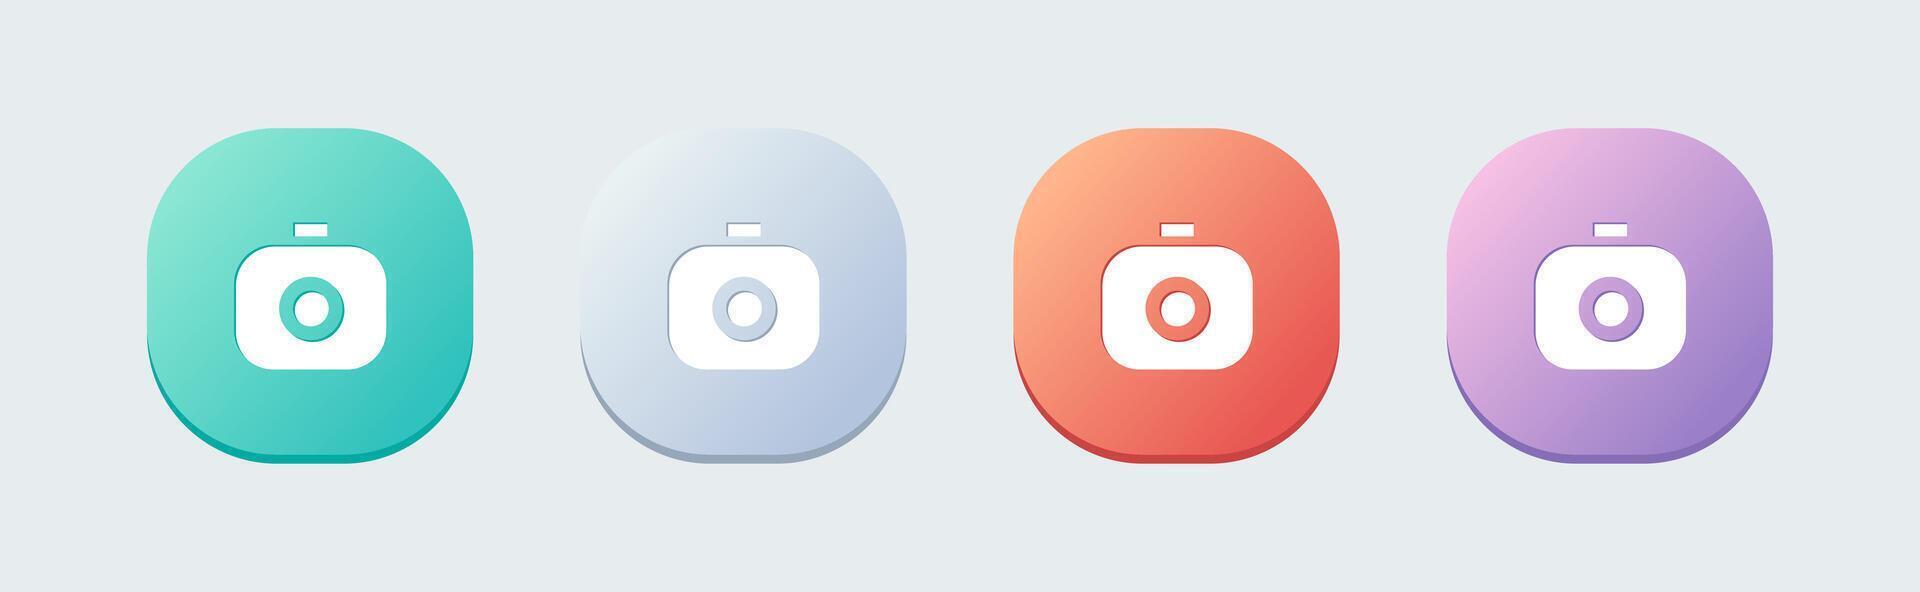 Camera solid icon in flat design style. Capture buttons signs vector illustration.